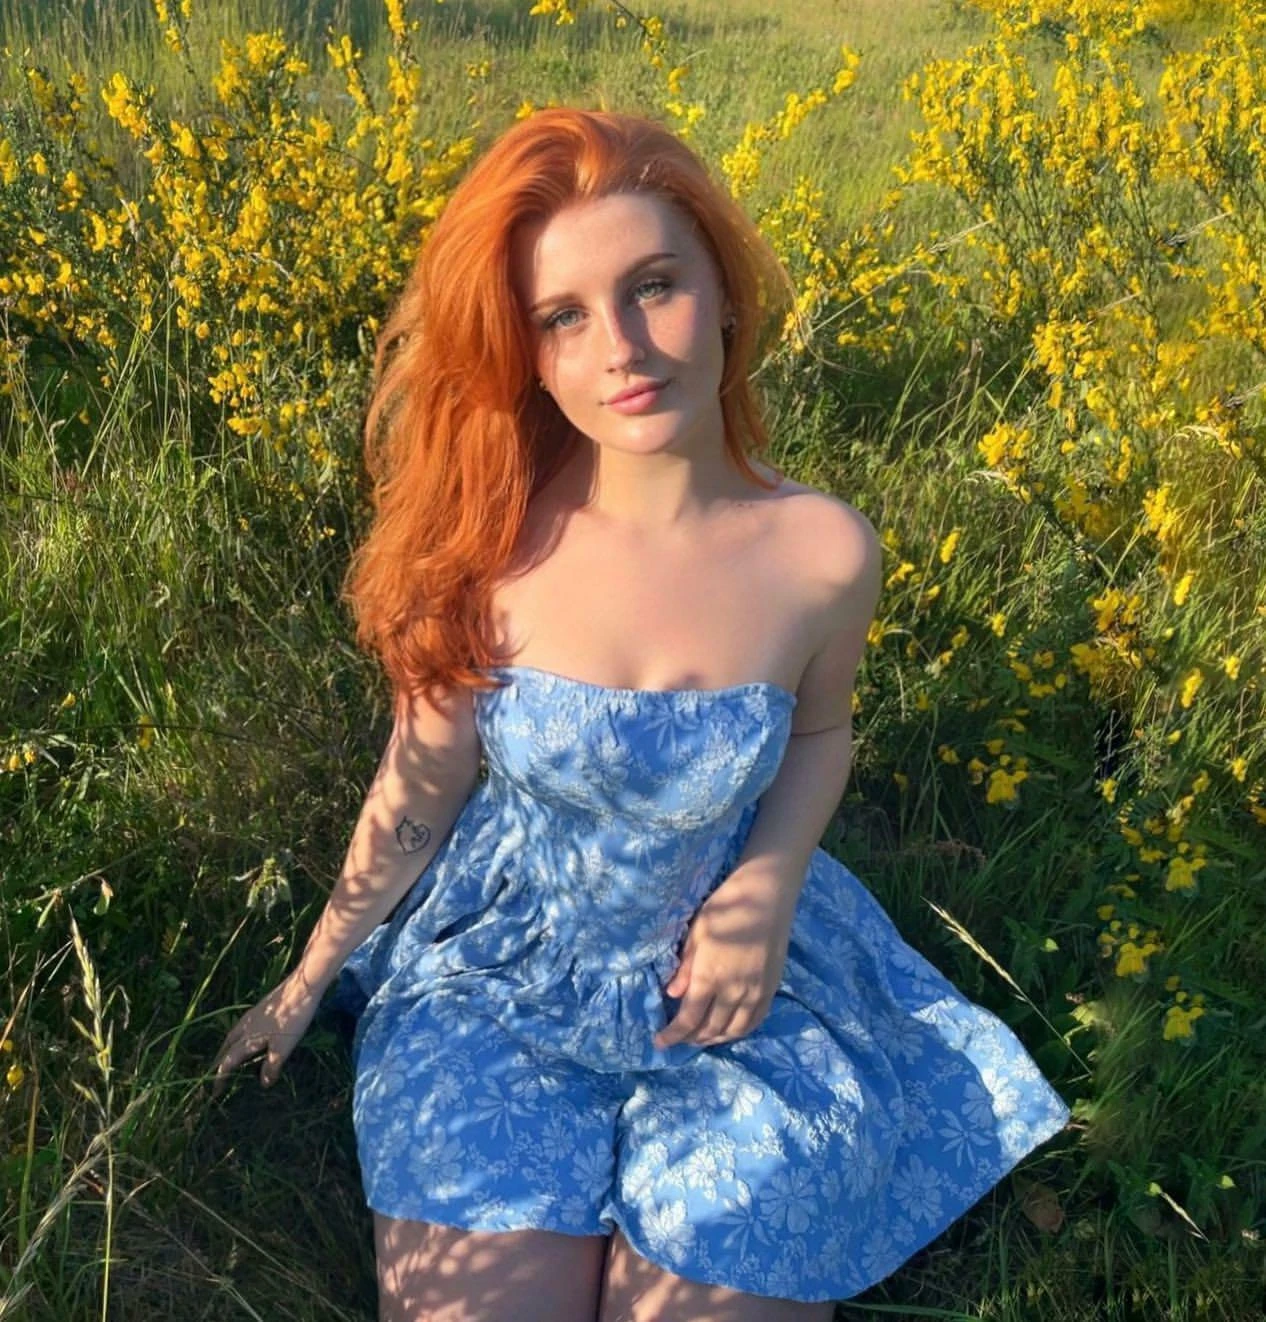 Out in a field